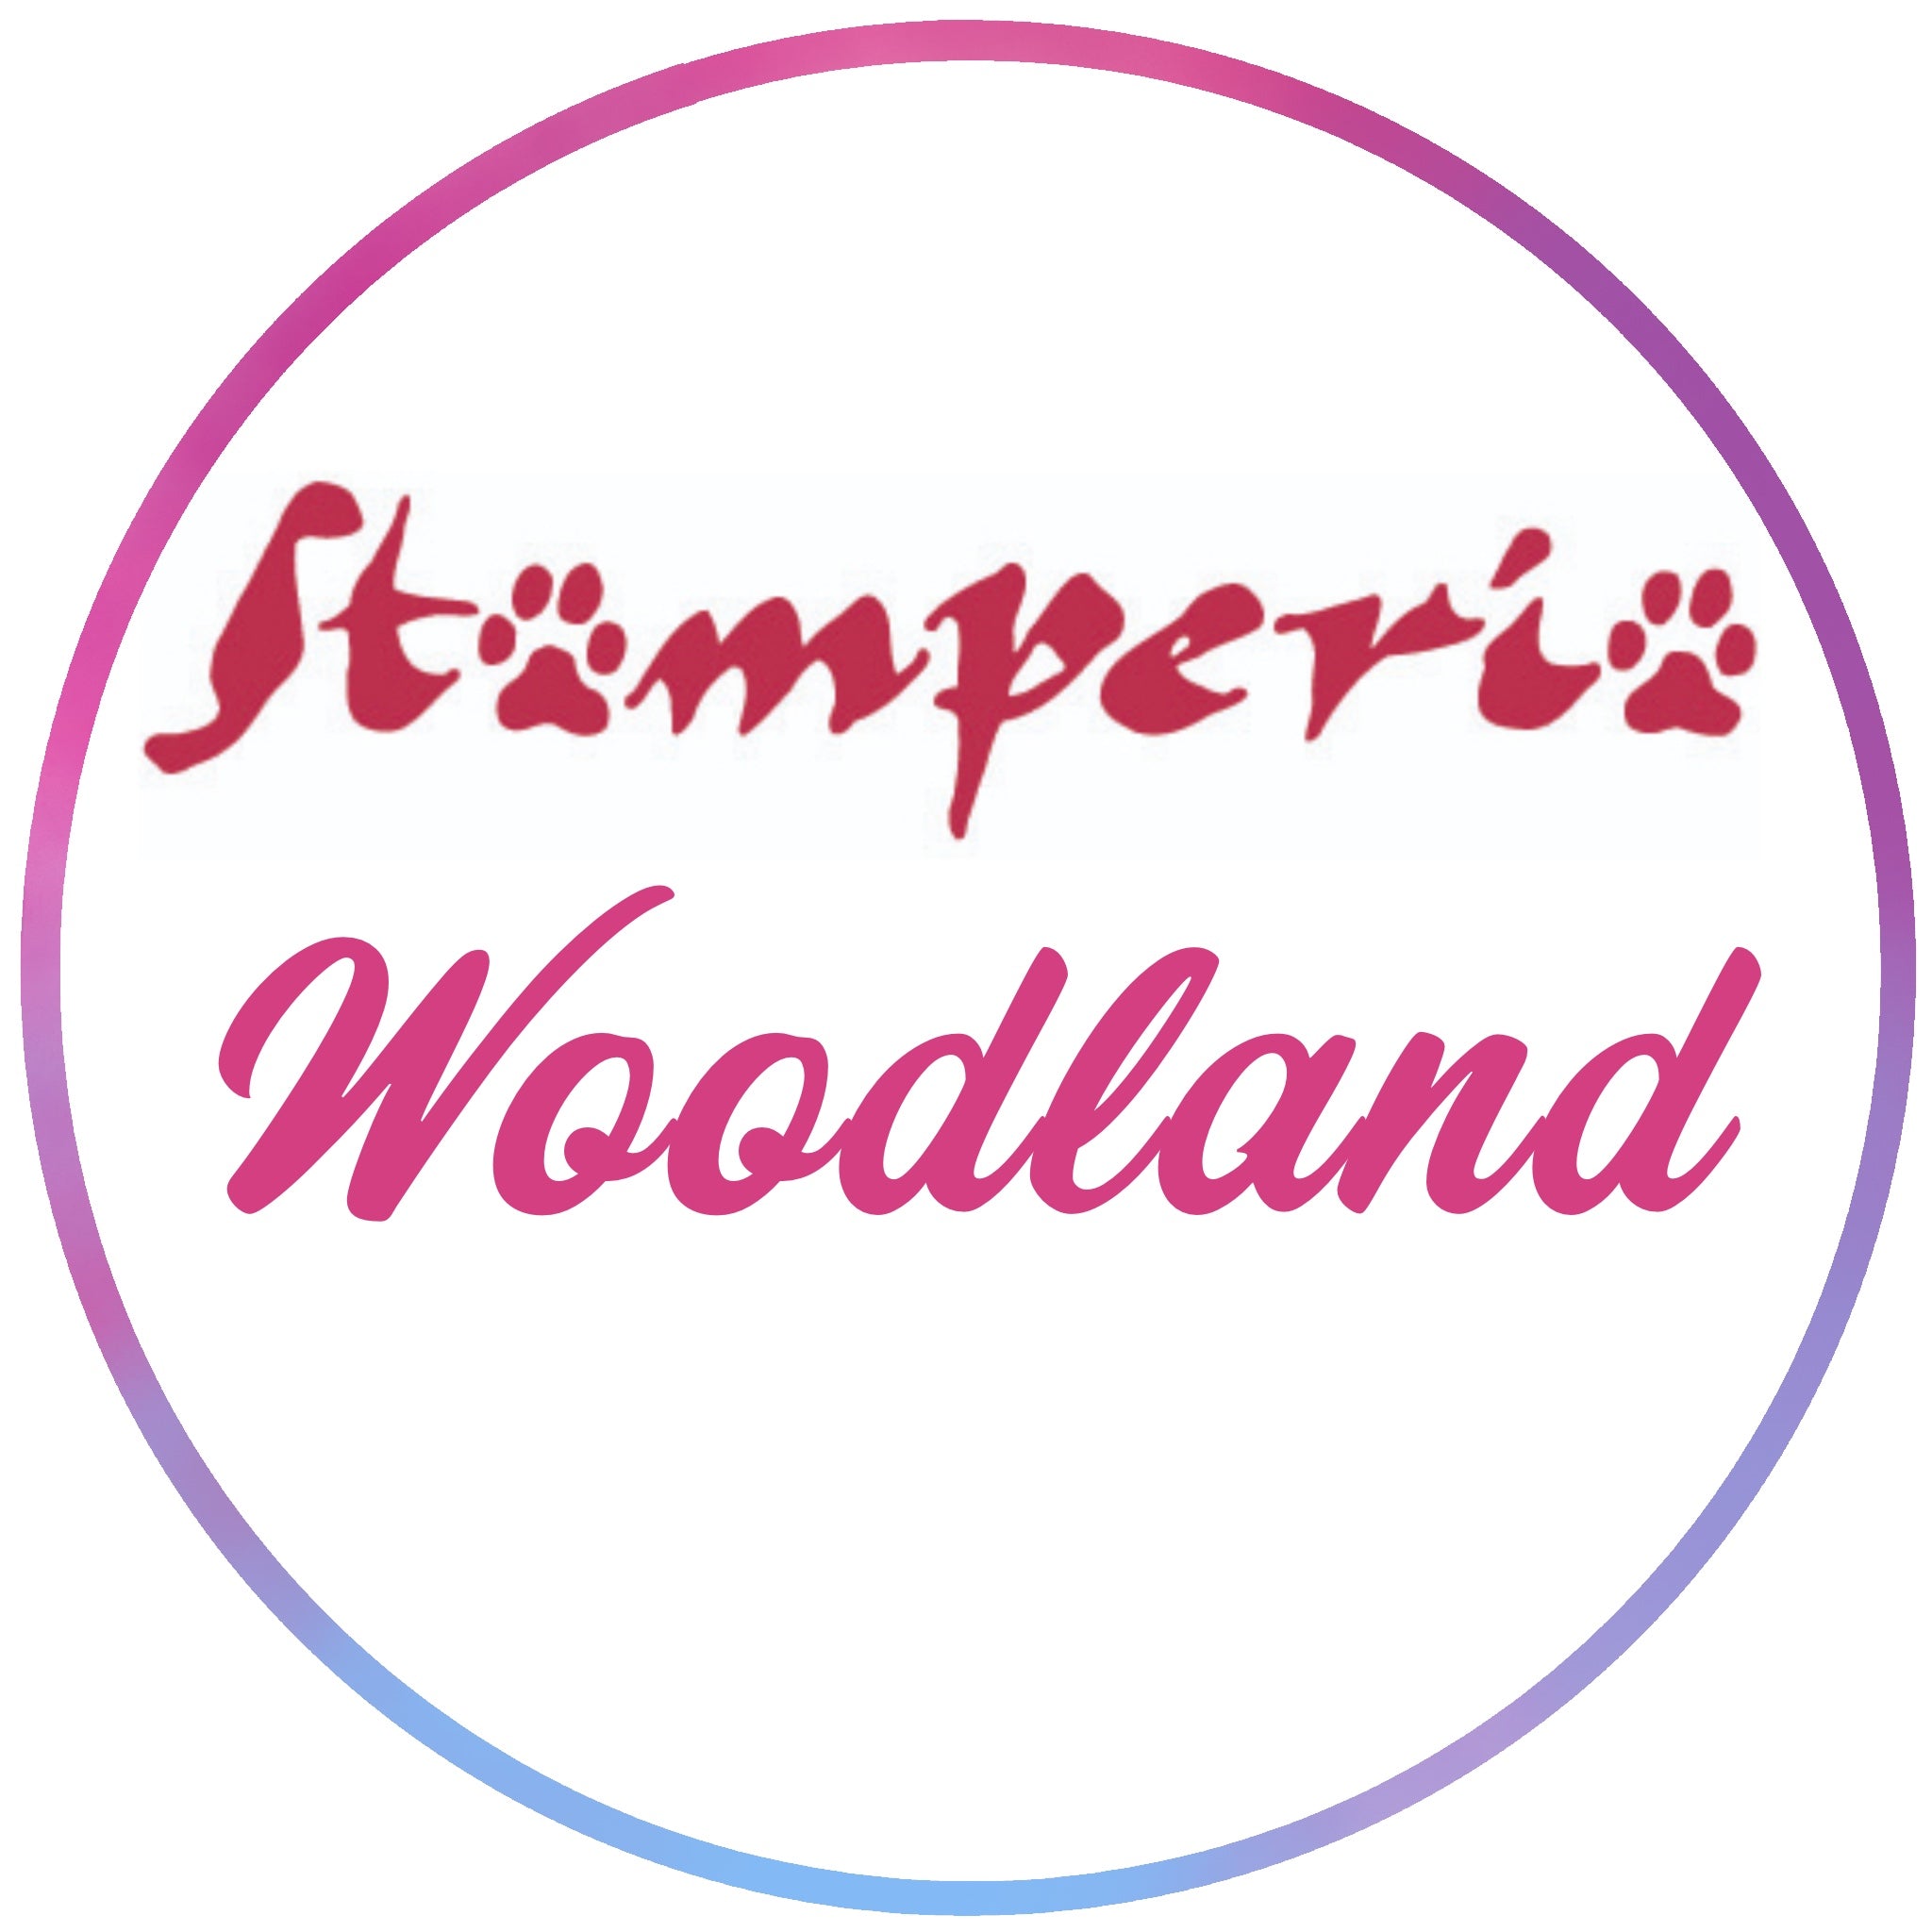 Stamperia Woodland 12” x 12” Paper Collection